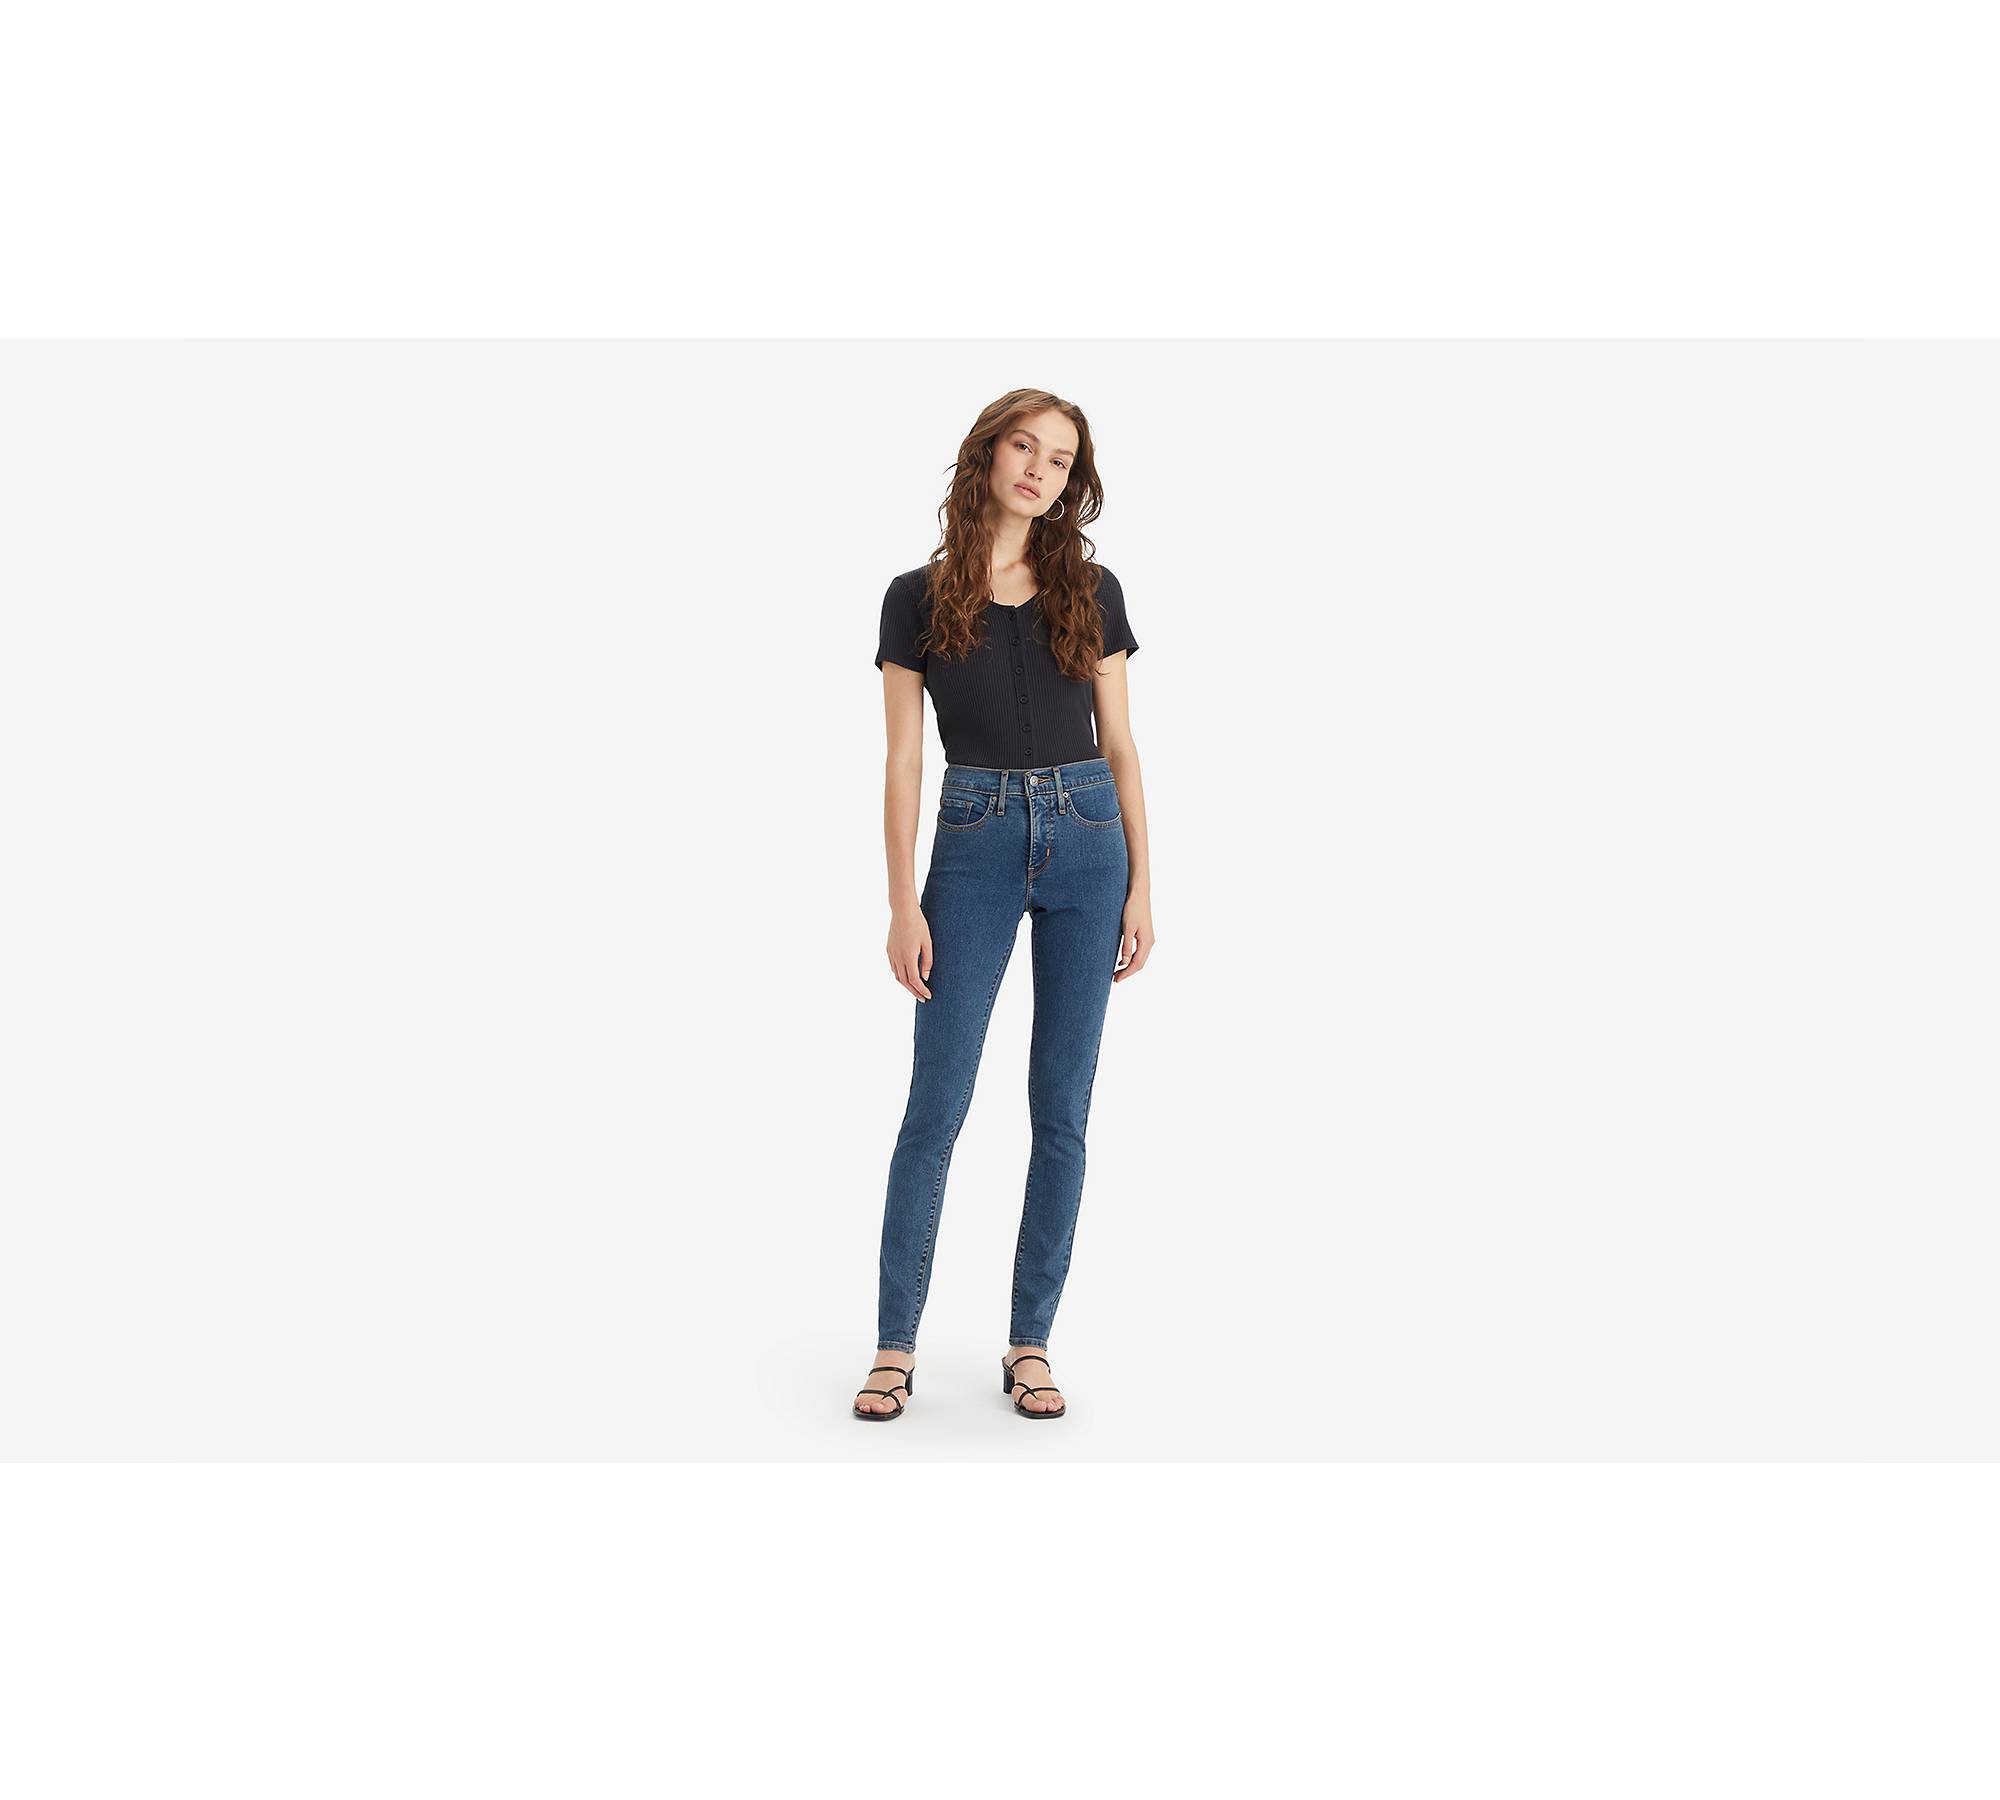 zuwimk Womens Jeans High Waisted,Women's Totally Shaping Skinny